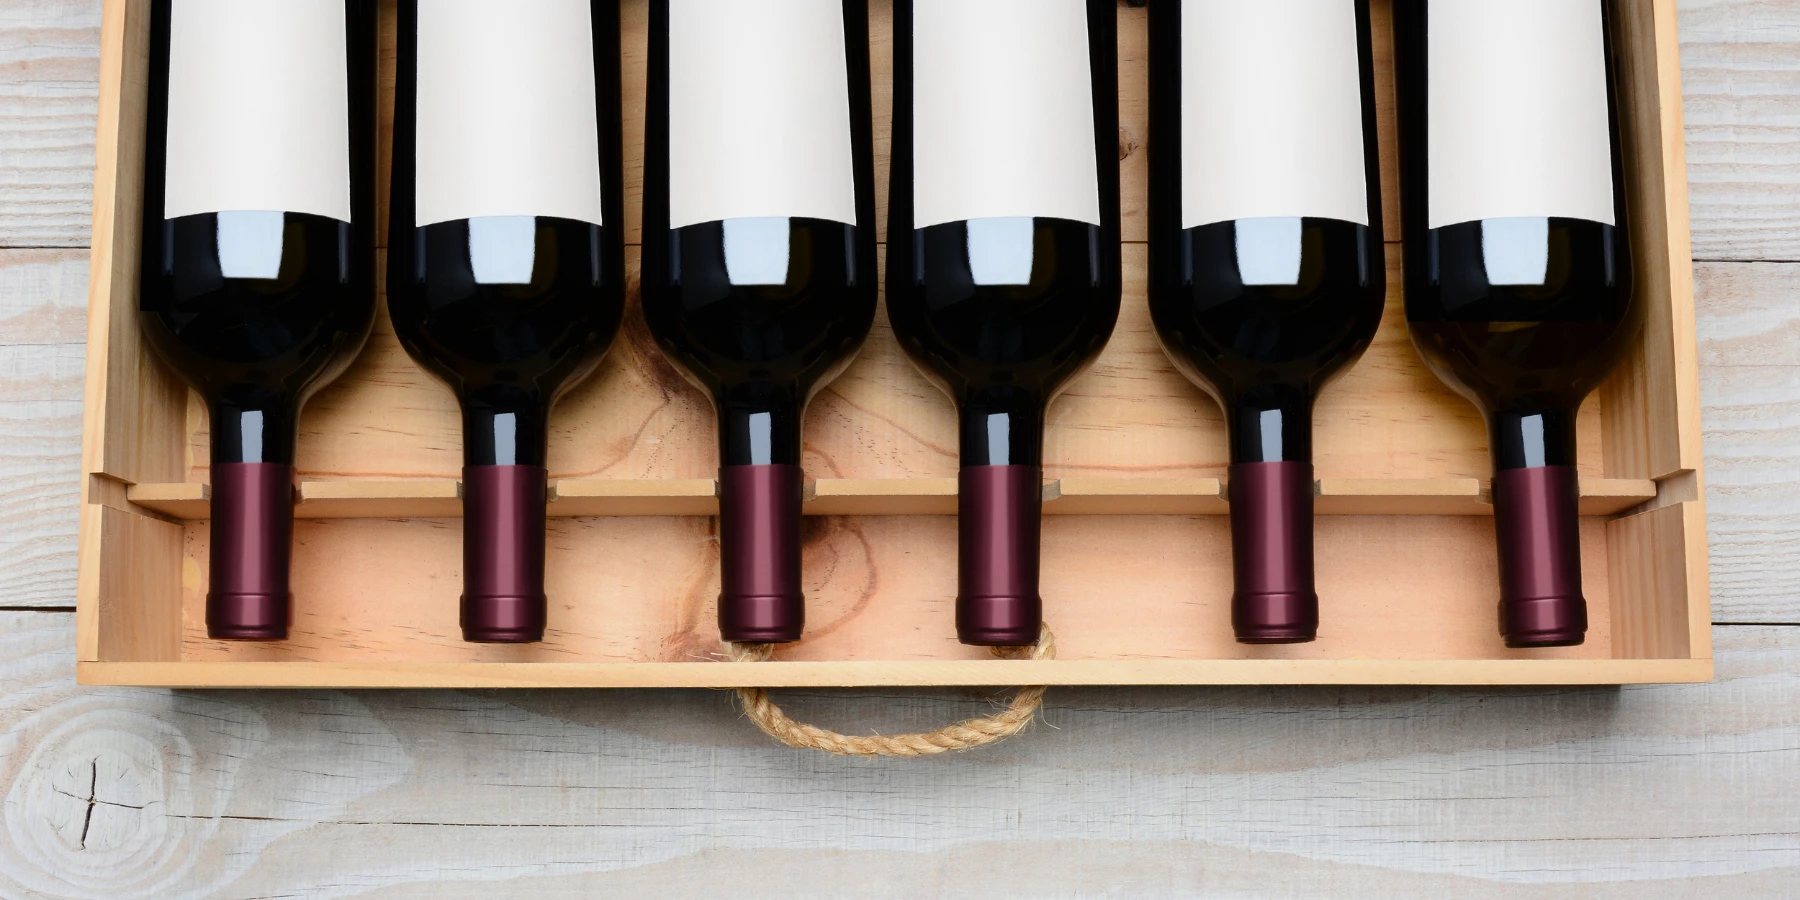 7 Top Tips For Packing Wine Bottles For Your Move